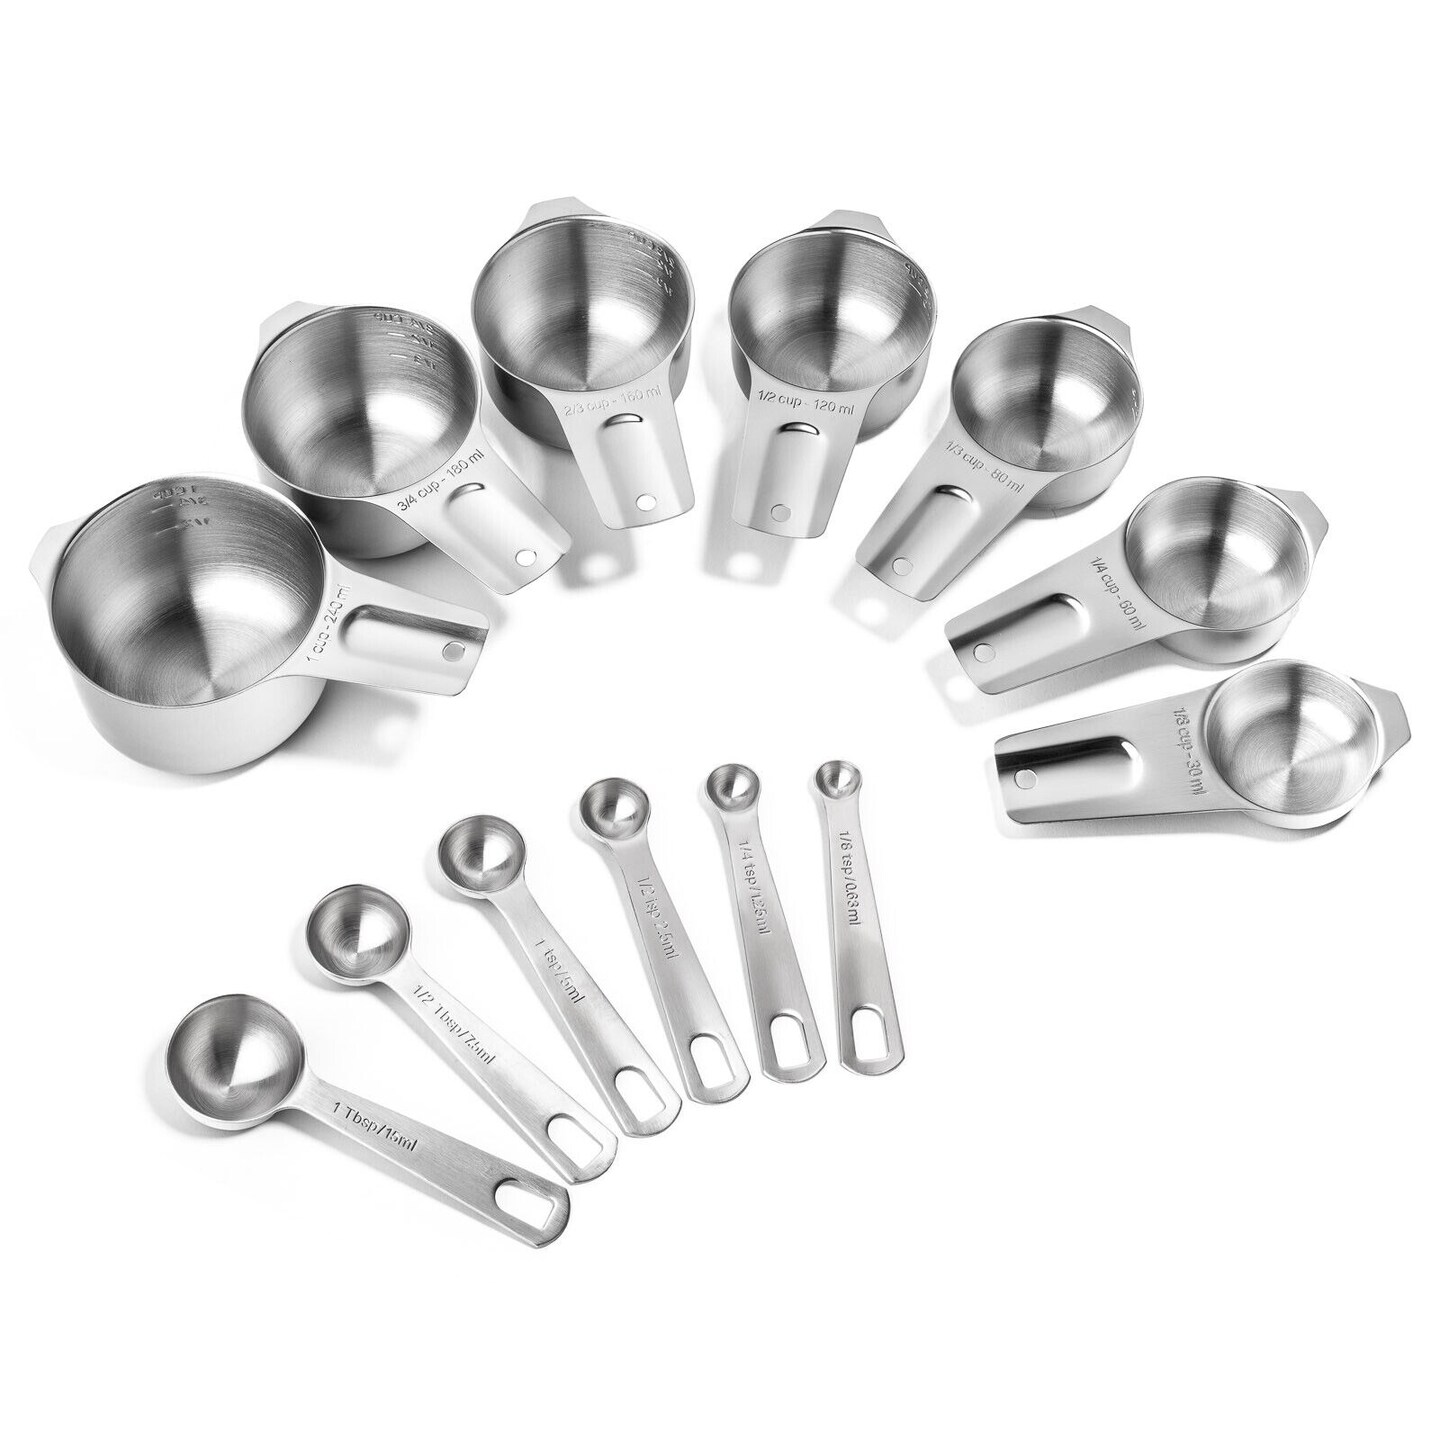 Stainless Steel Measuring Cups and Spoons 13 pcs